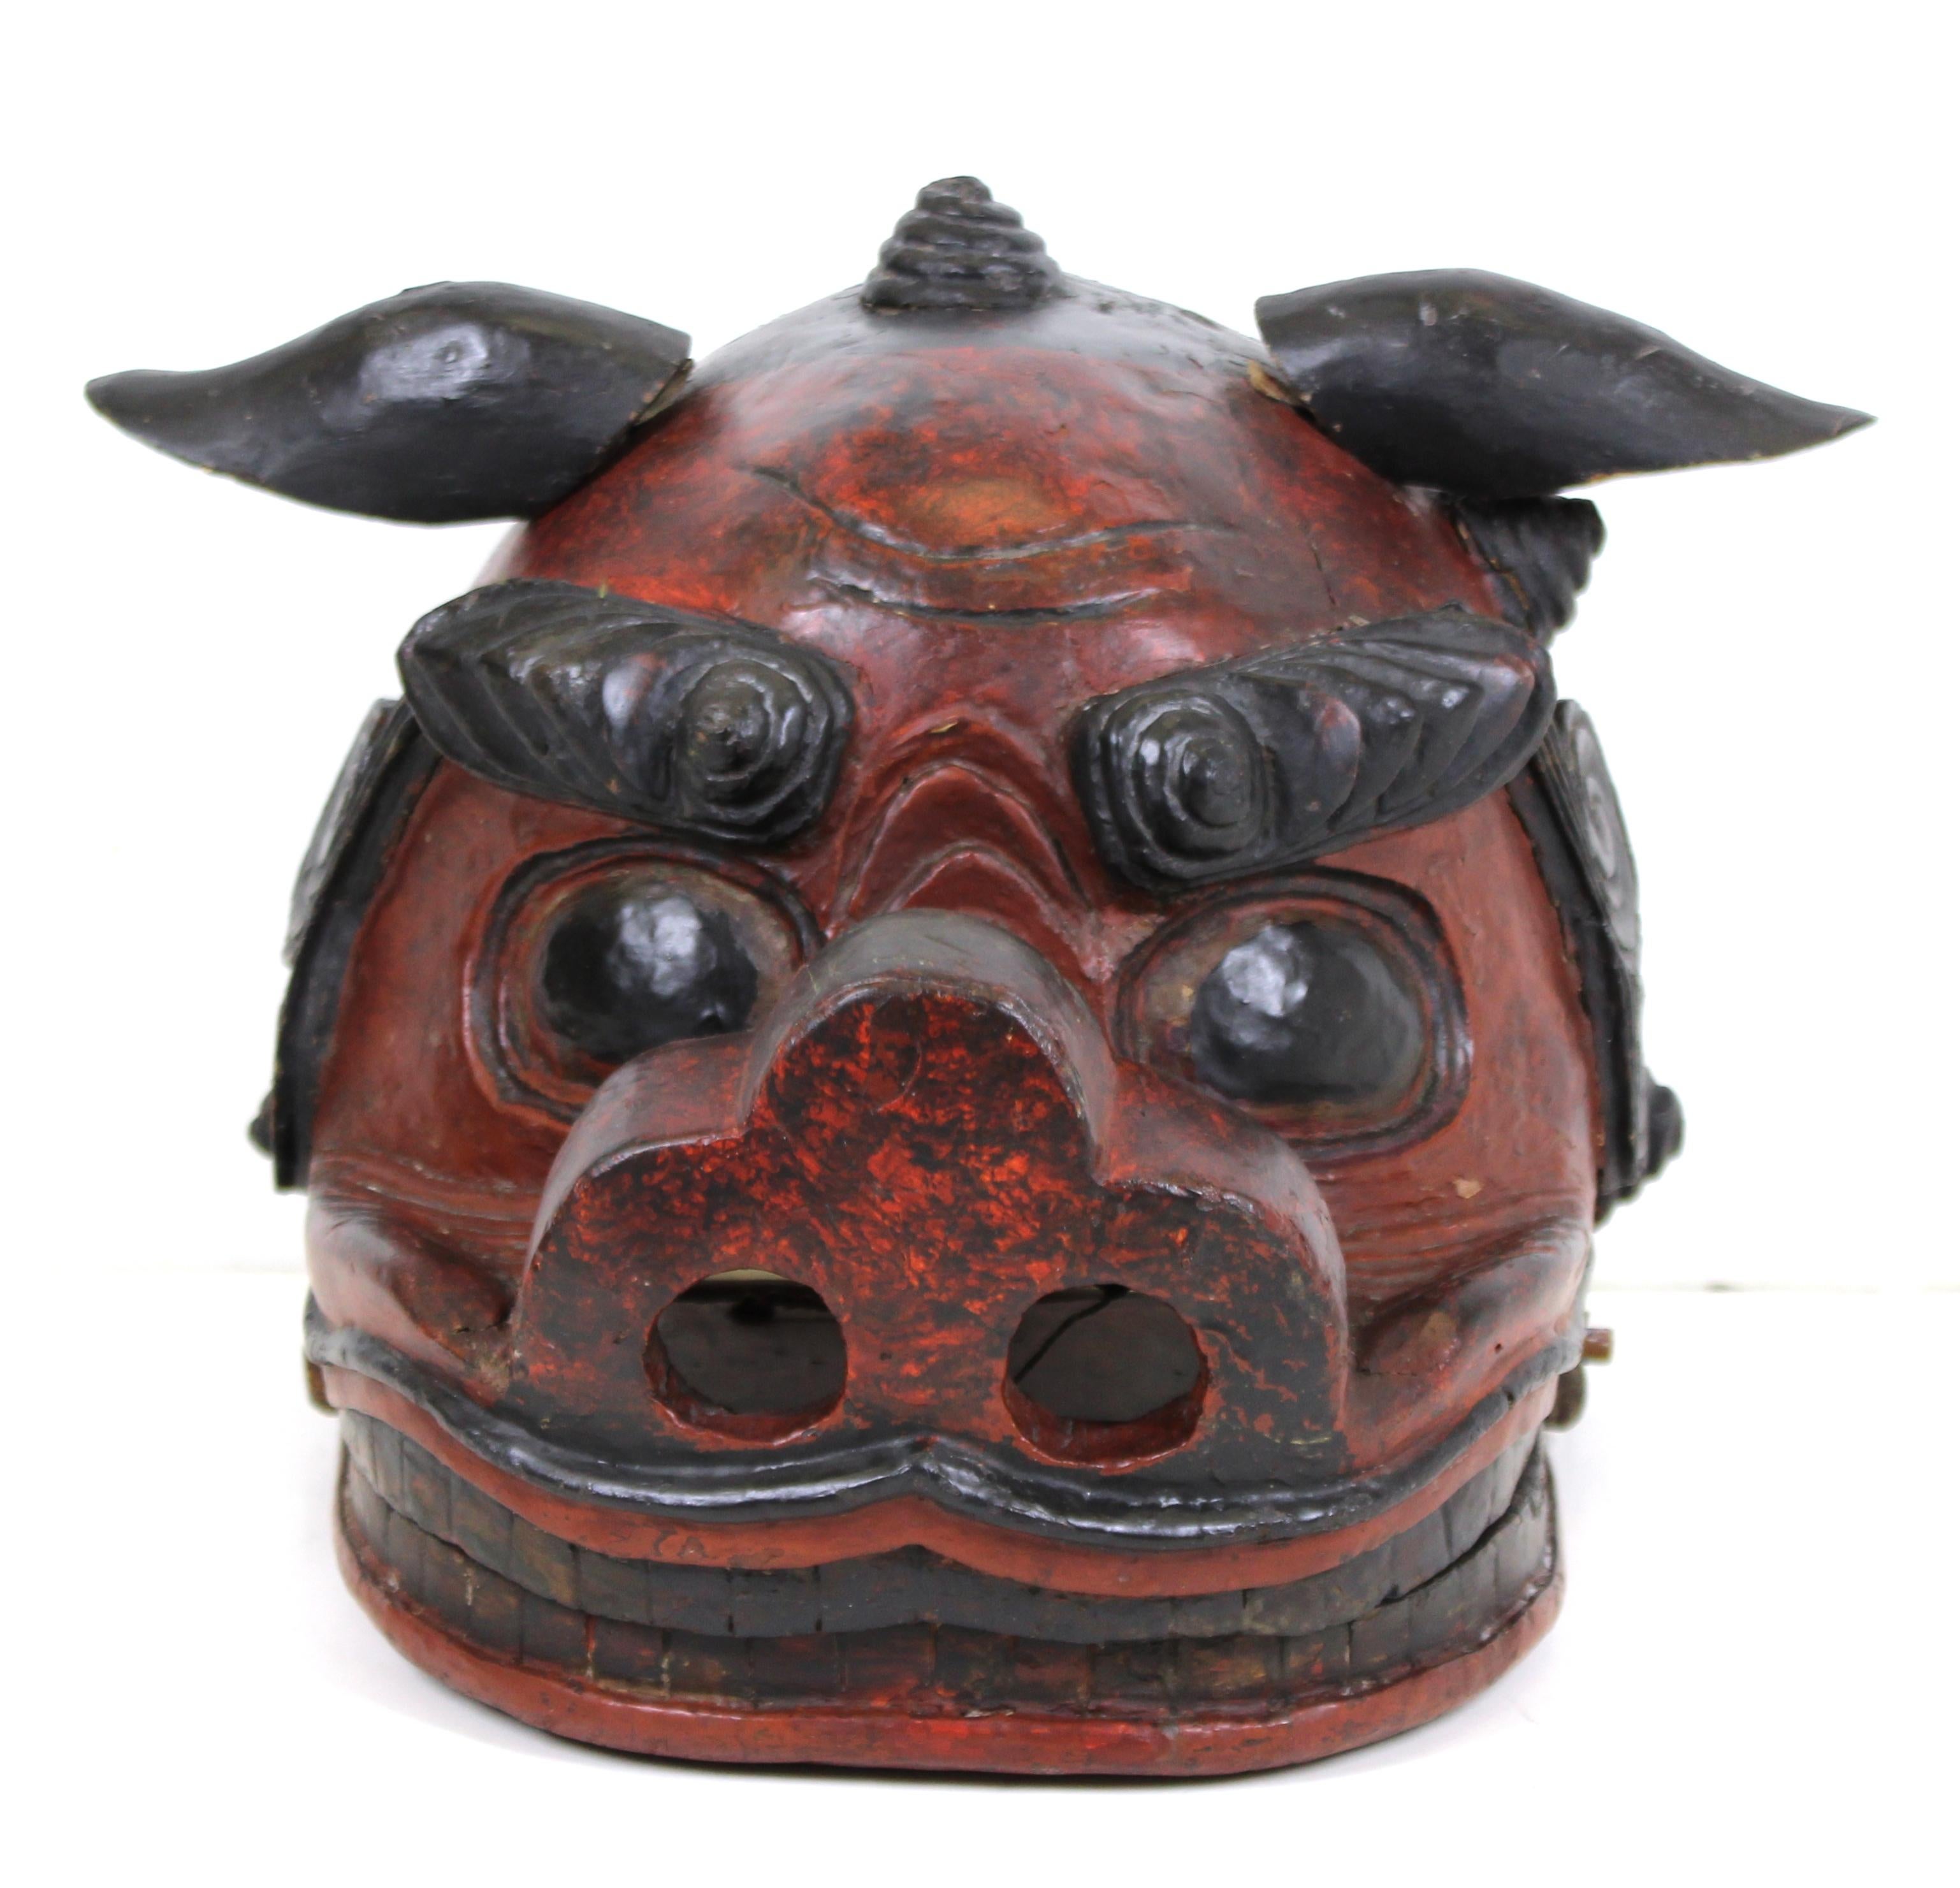 A rare Edo period (17th century-18th century) Japanese lion mask for the Gion Festival. This mask was part of a two-man costume, with one man holding the mask and the other at the back covered with fabric to perform the traditional Lion Dance. An